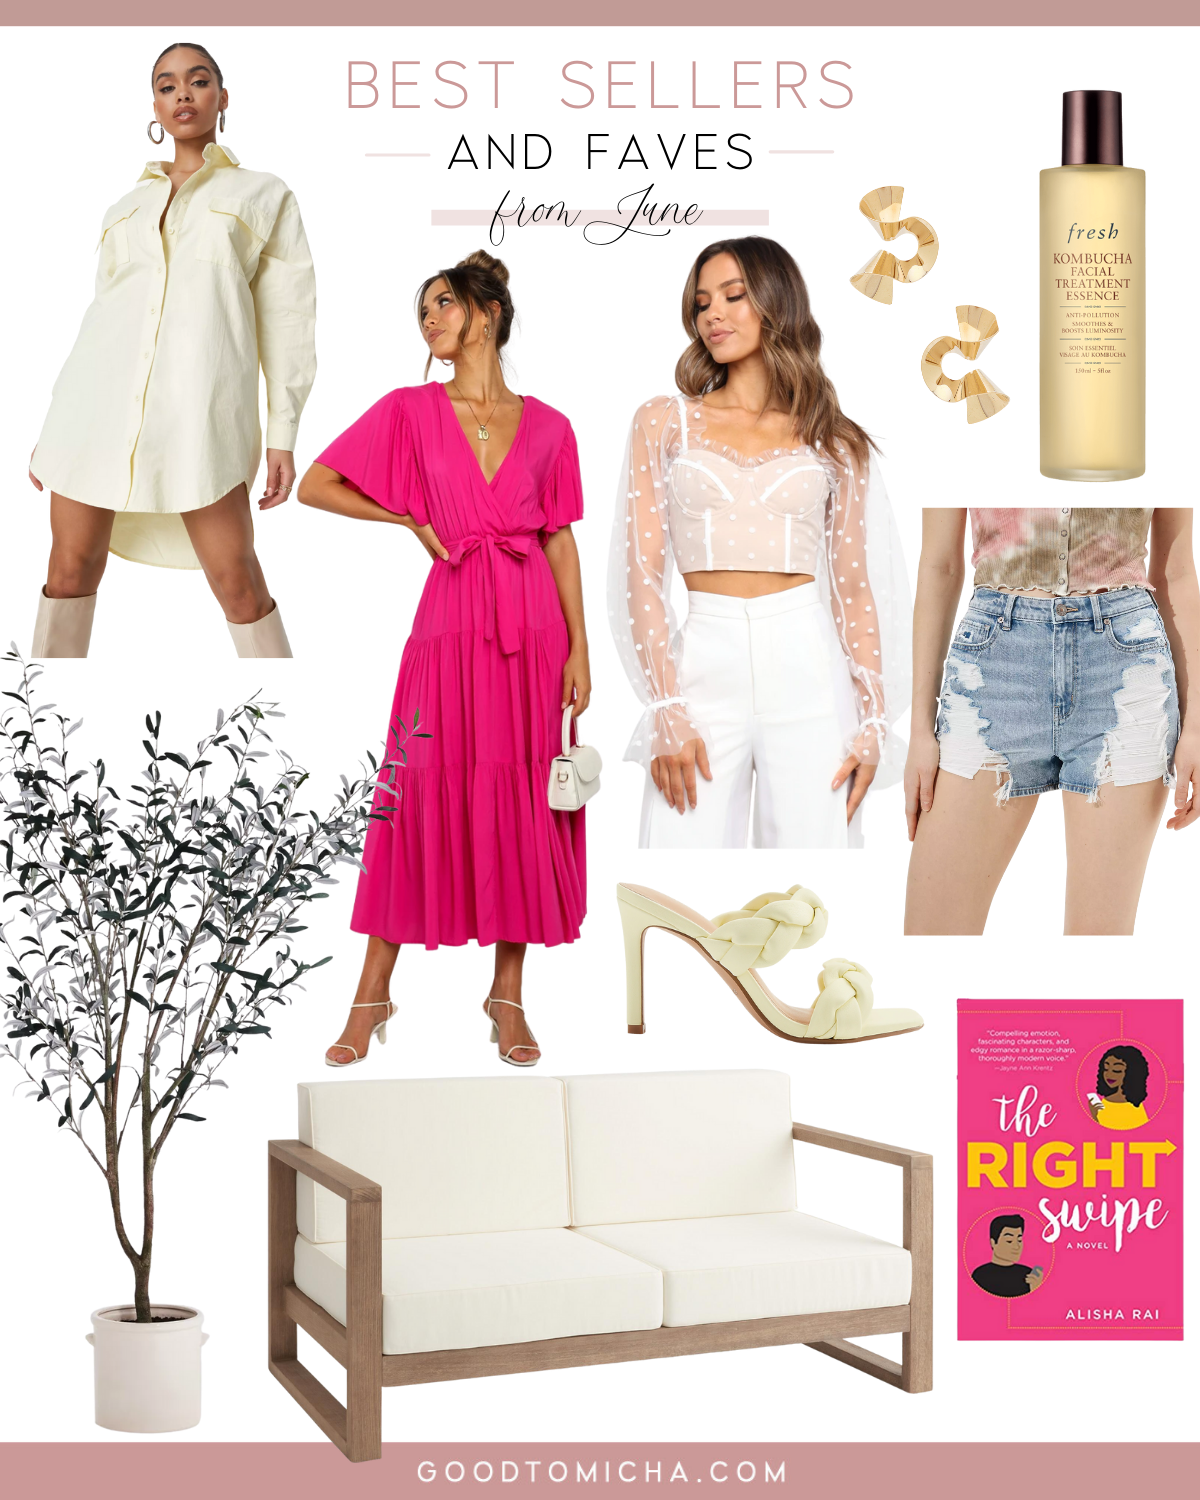 The top selling items from followers for GoodTomicha for the month of June a collage of patio furniture, summer style, denim shorts, rom com novel, skincare products, and home decor